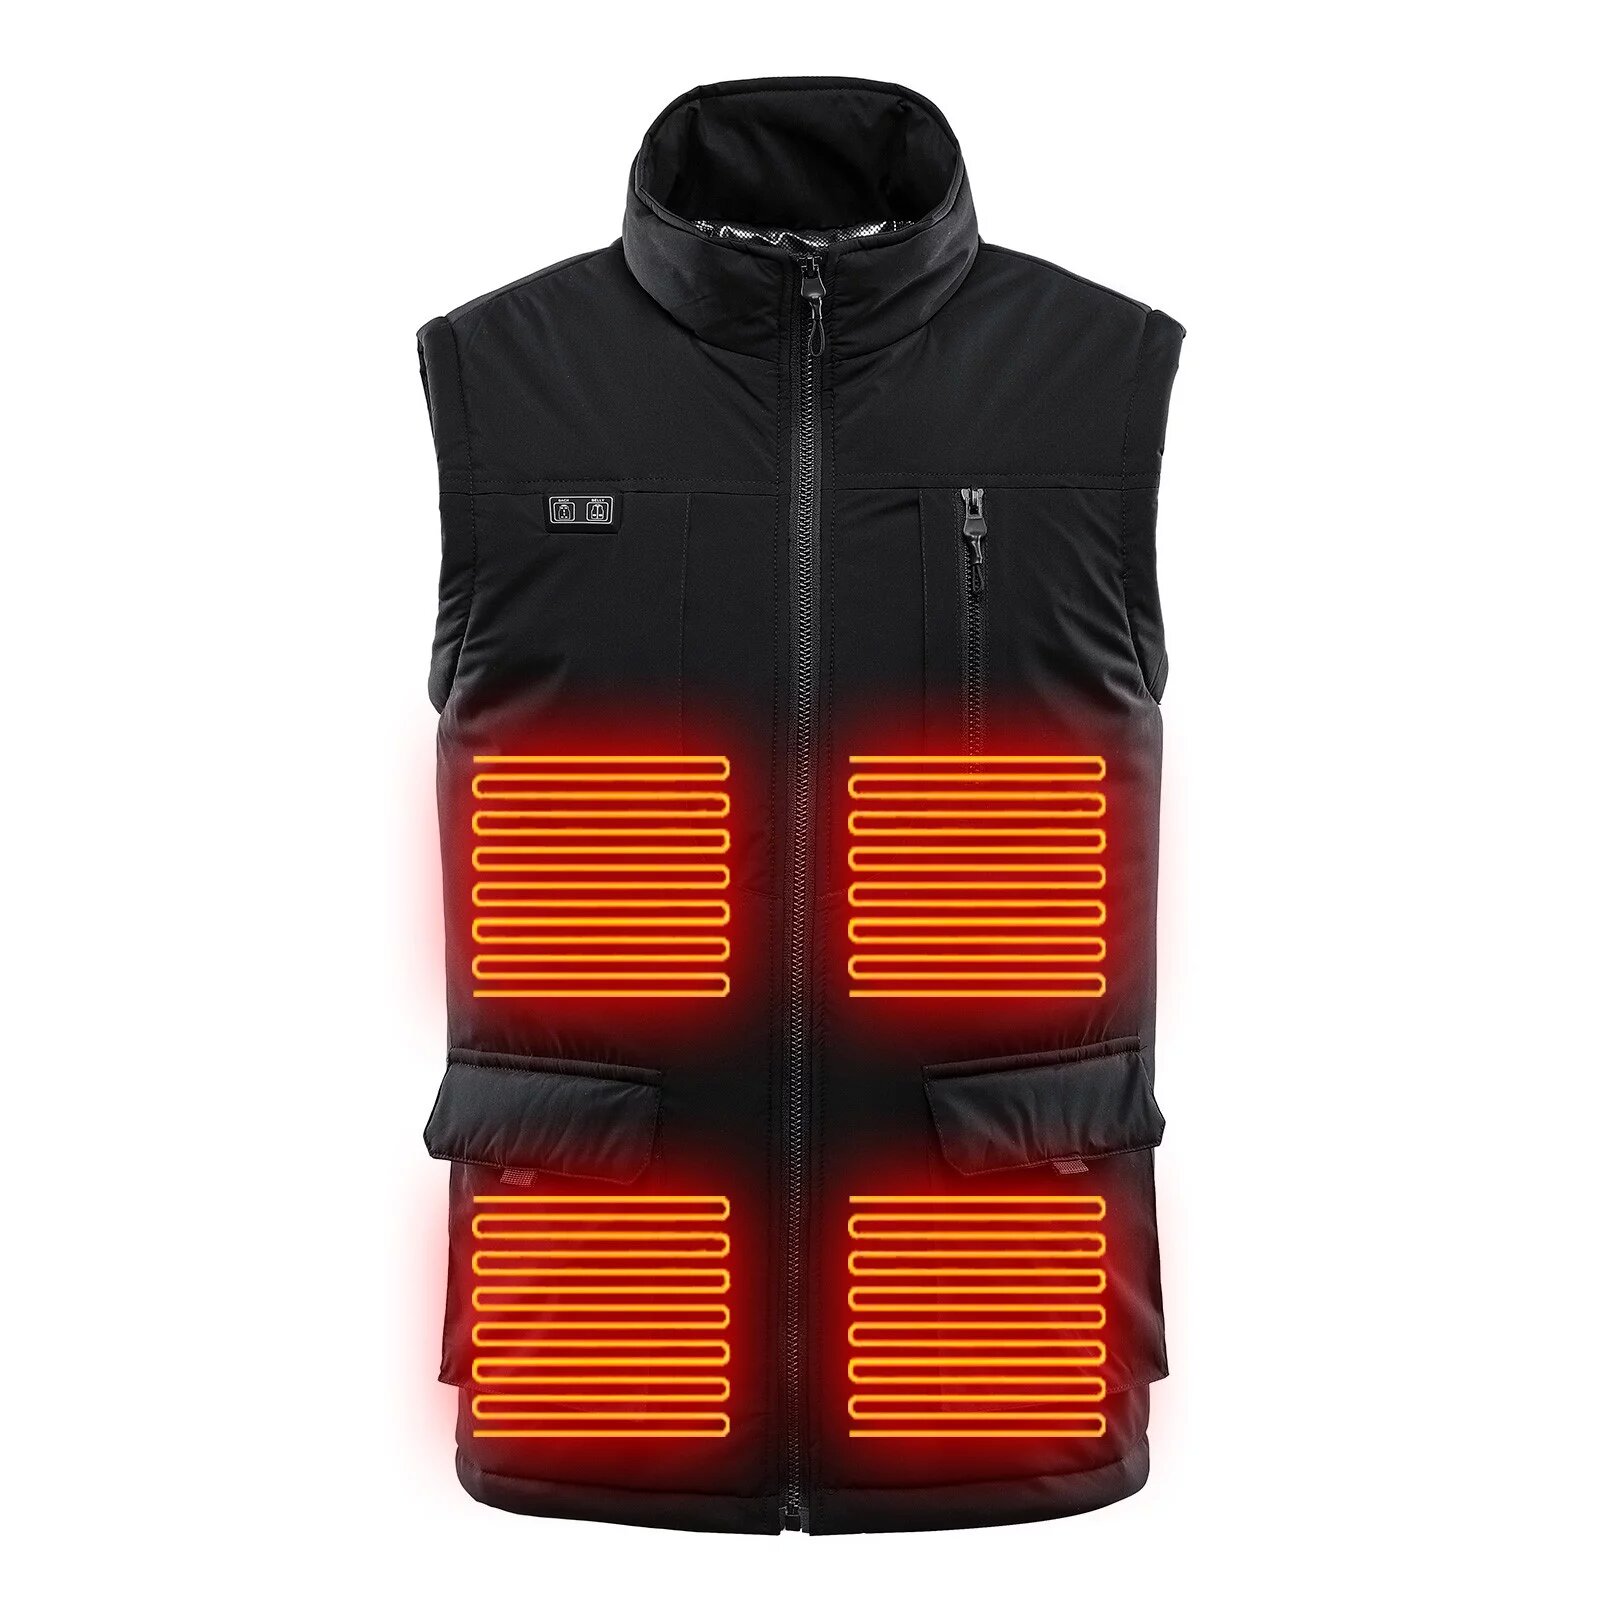 TENGOO HV-11B Unisex 11 Places Heating Vest 3-Gears Heated Jackets USB Electric Thermal Clothing Winter Warm Vest Outdoor Heat Coat Clothing